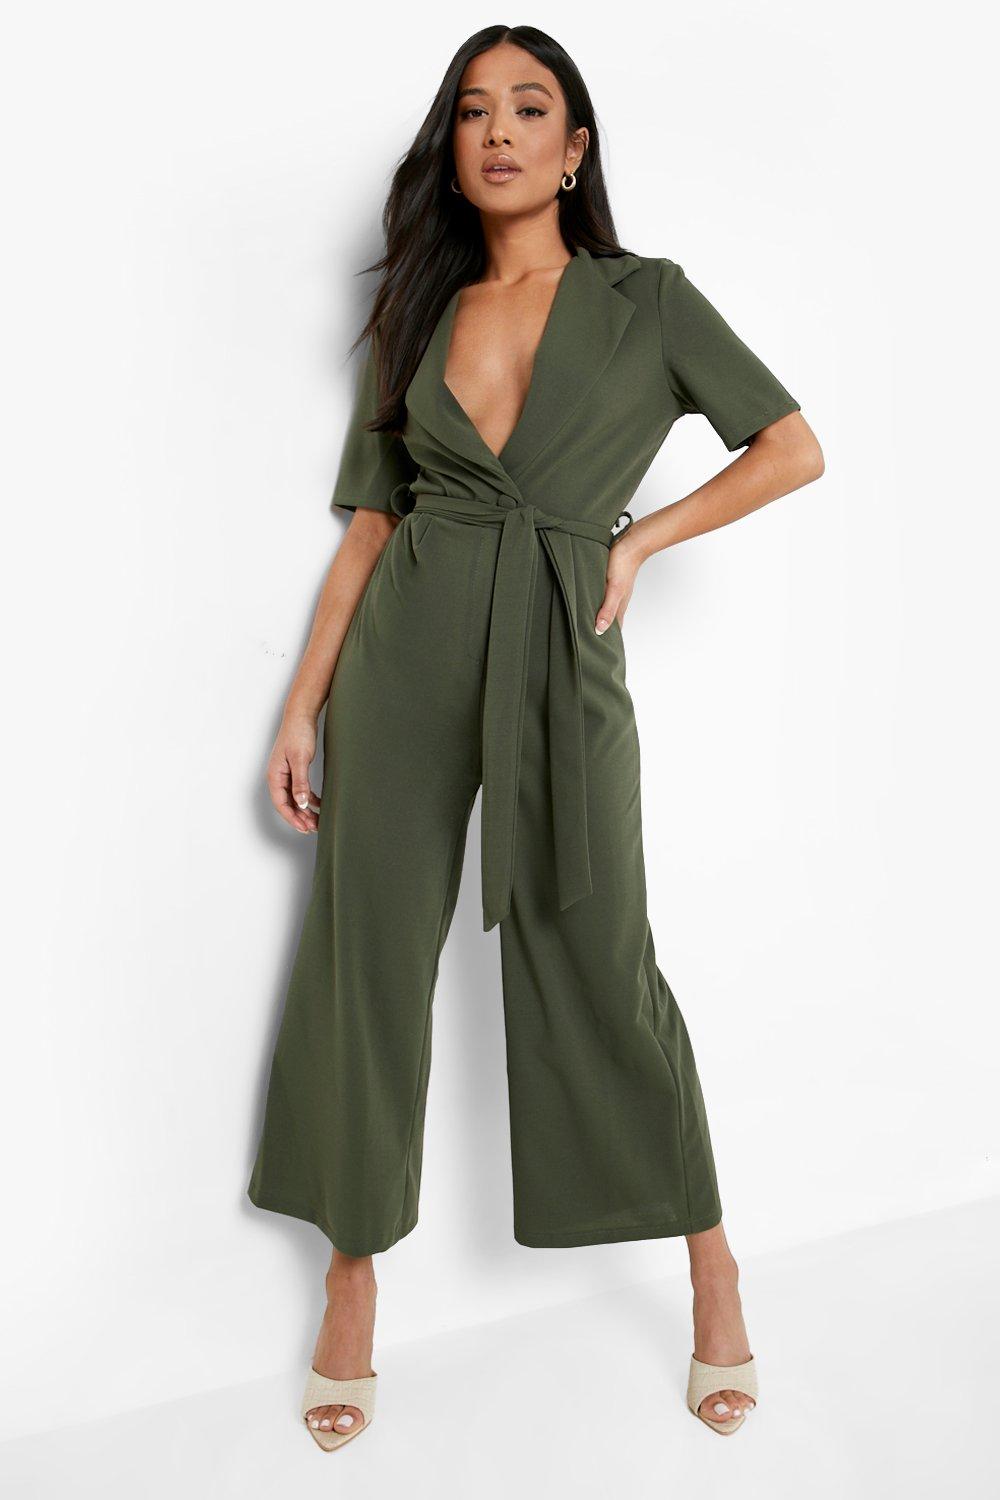 Womens Petite Tailored Short Sleeve Belted Jumpsuit - Green - 12, Green